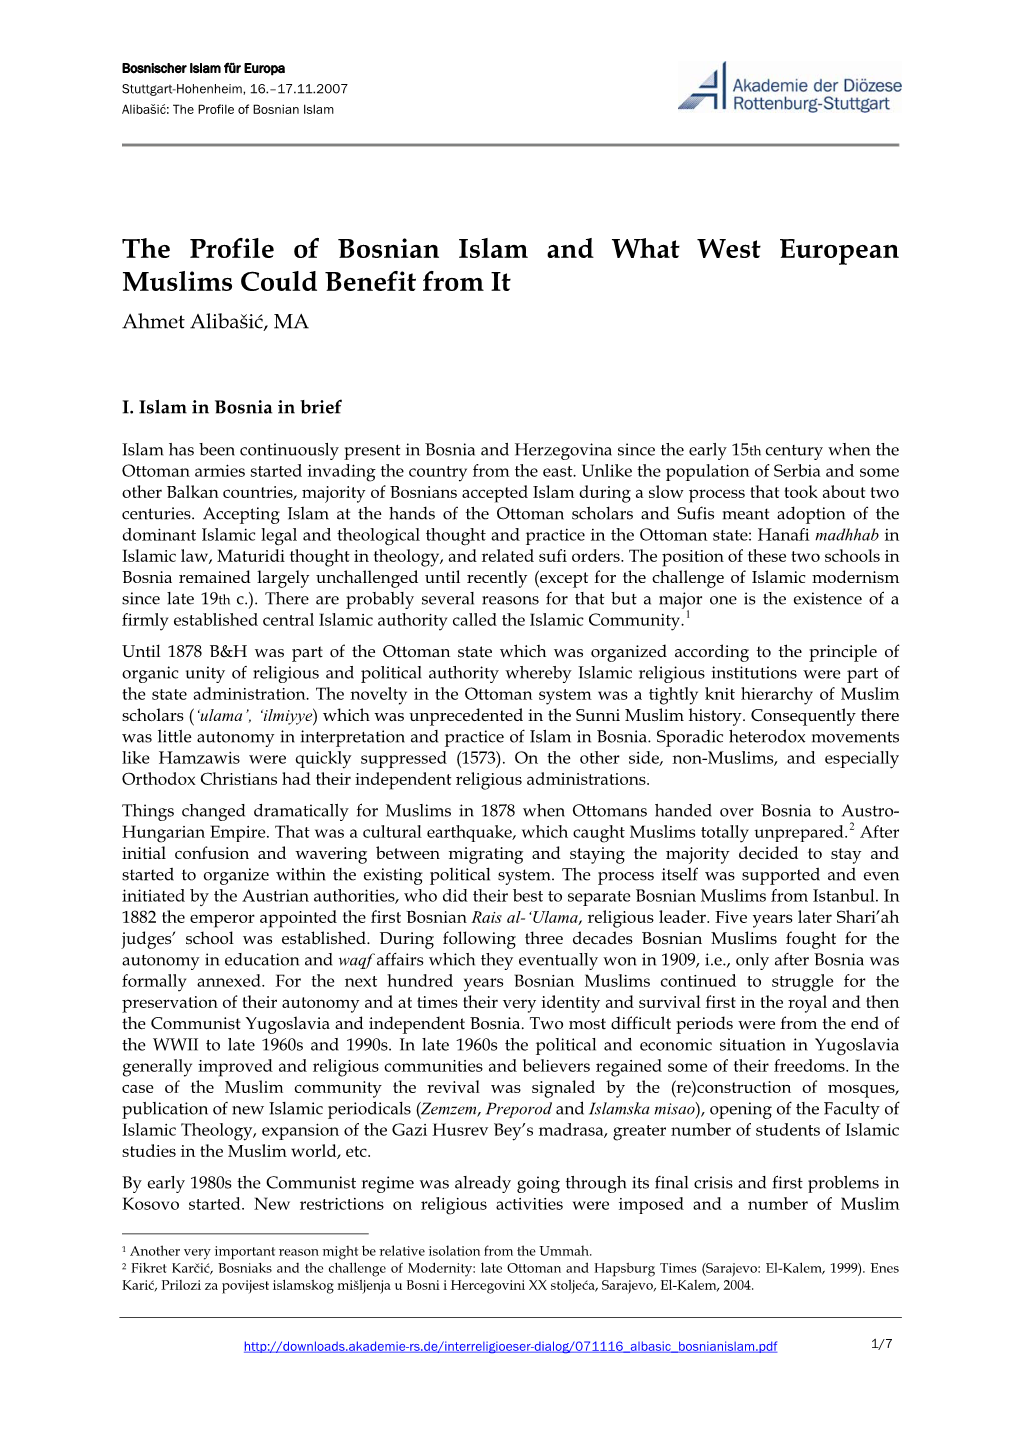 The Profile of Bosnian Islam and What West European Muslims Could Benefit from It Ahmet Alibašić, MA